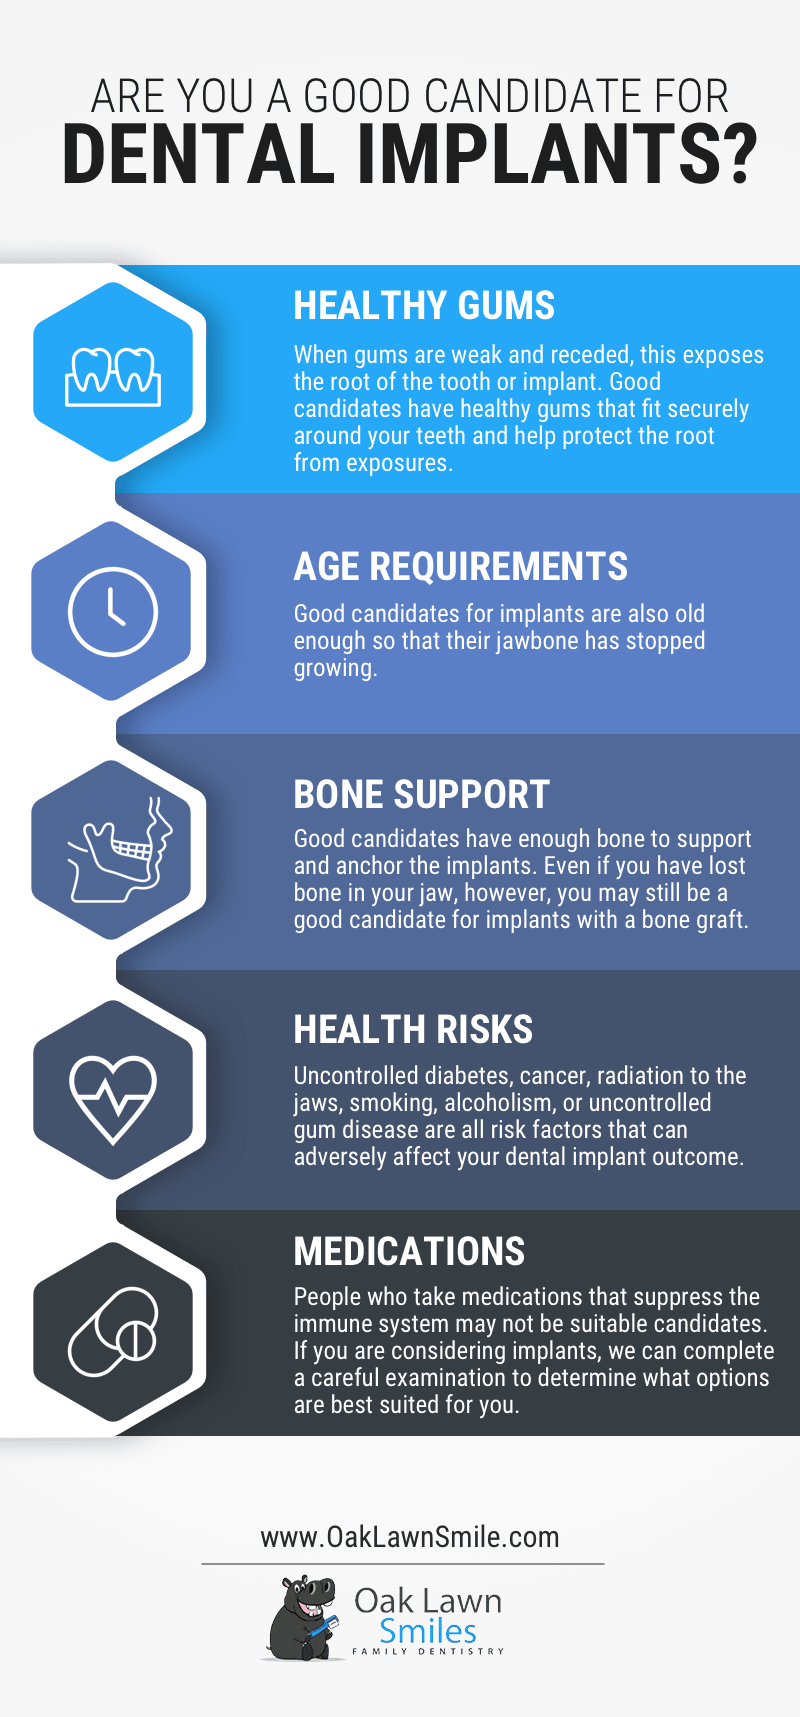 Infographic describing the candidate requirements for dental implants